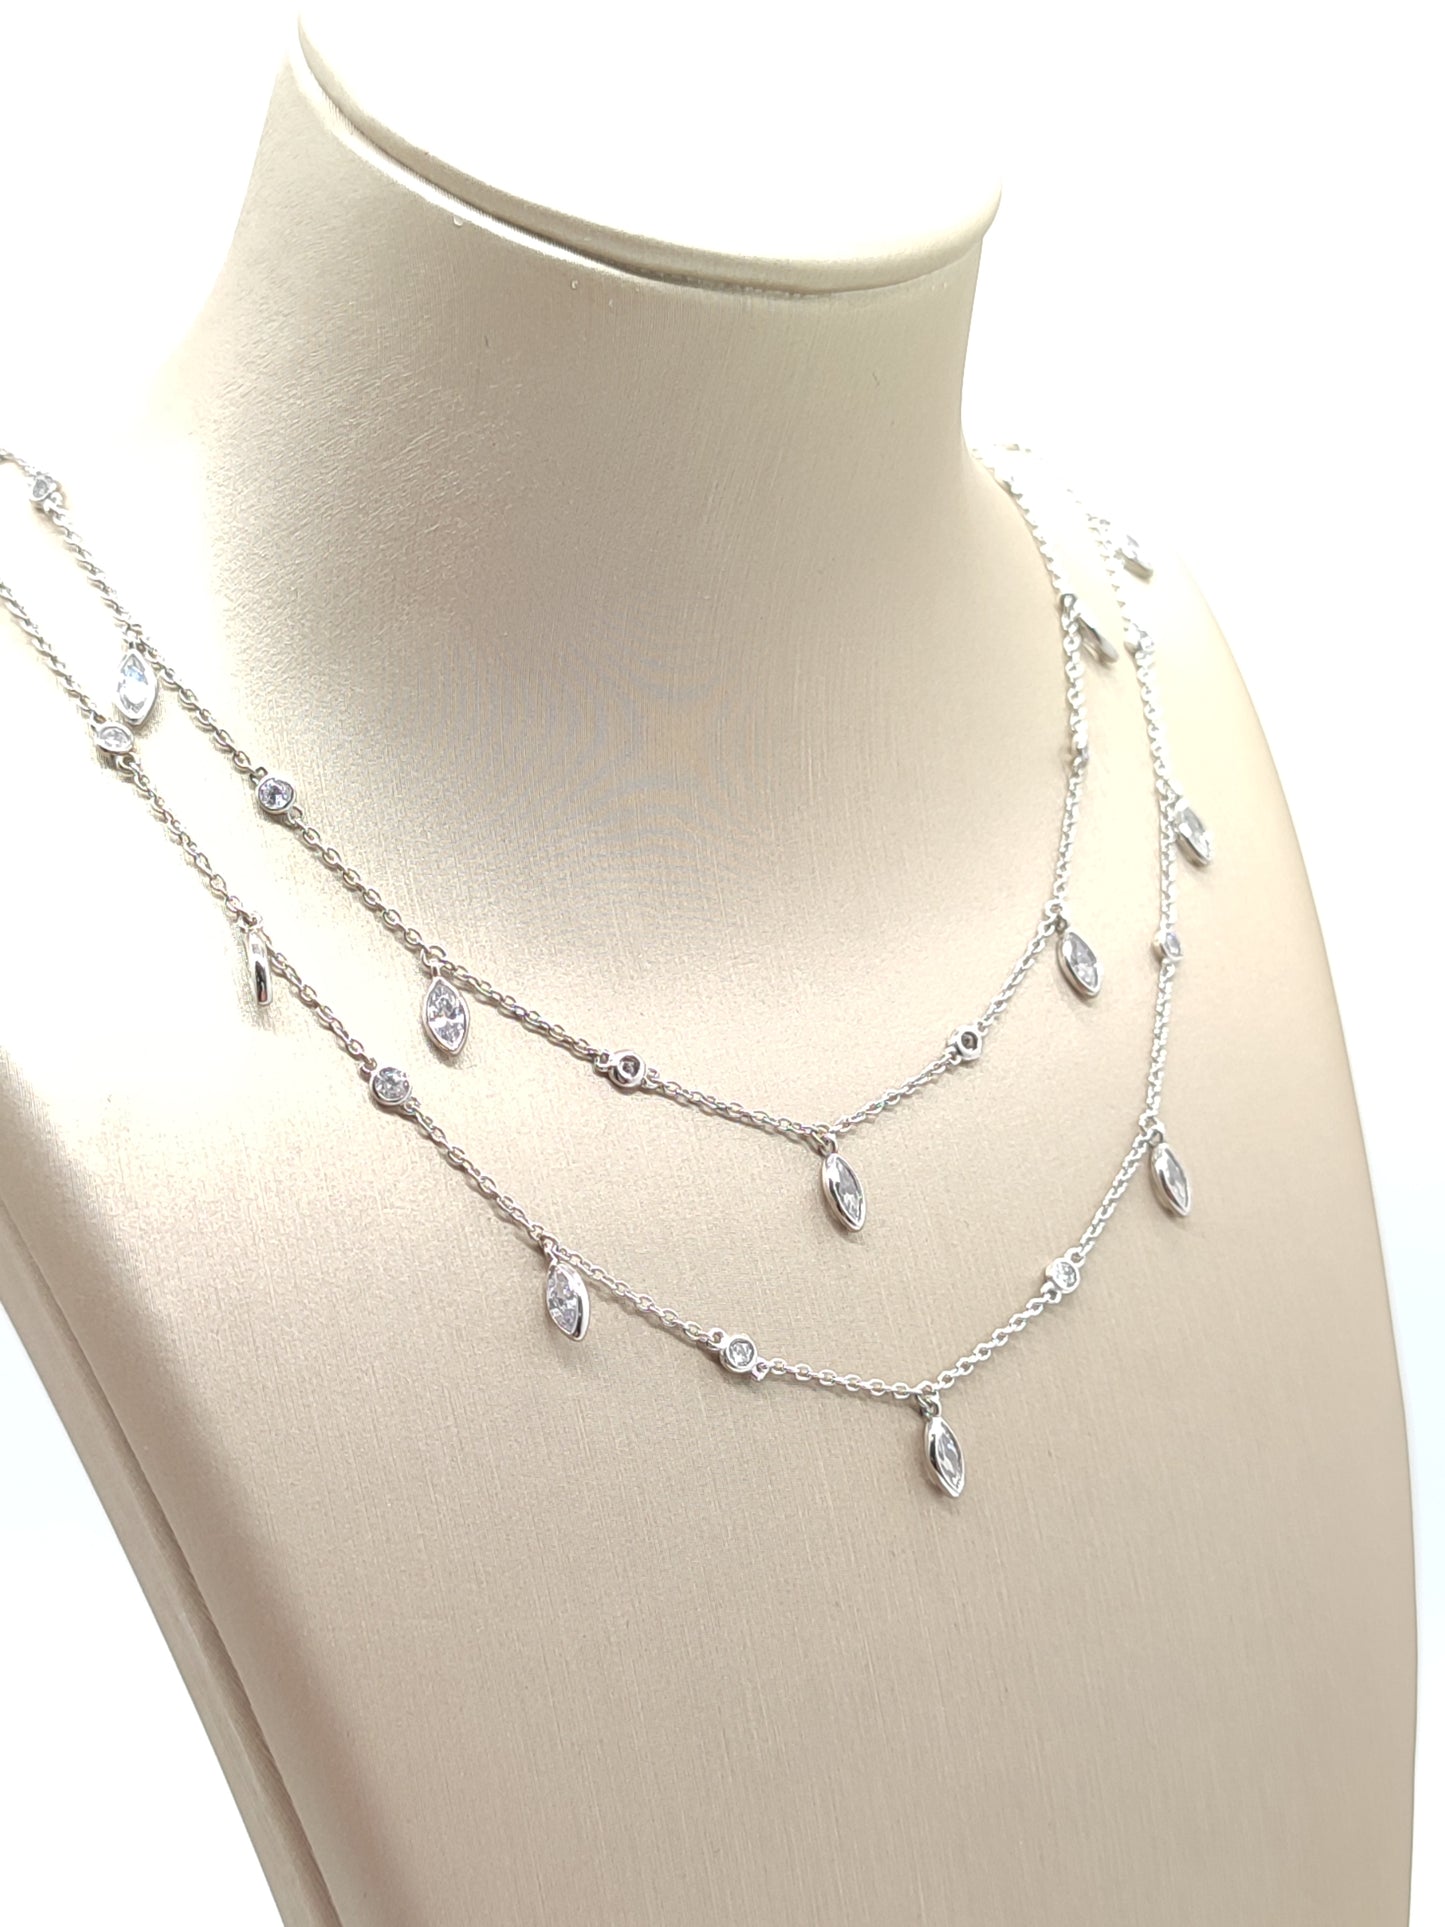 Long necklace with shuttle zirconia